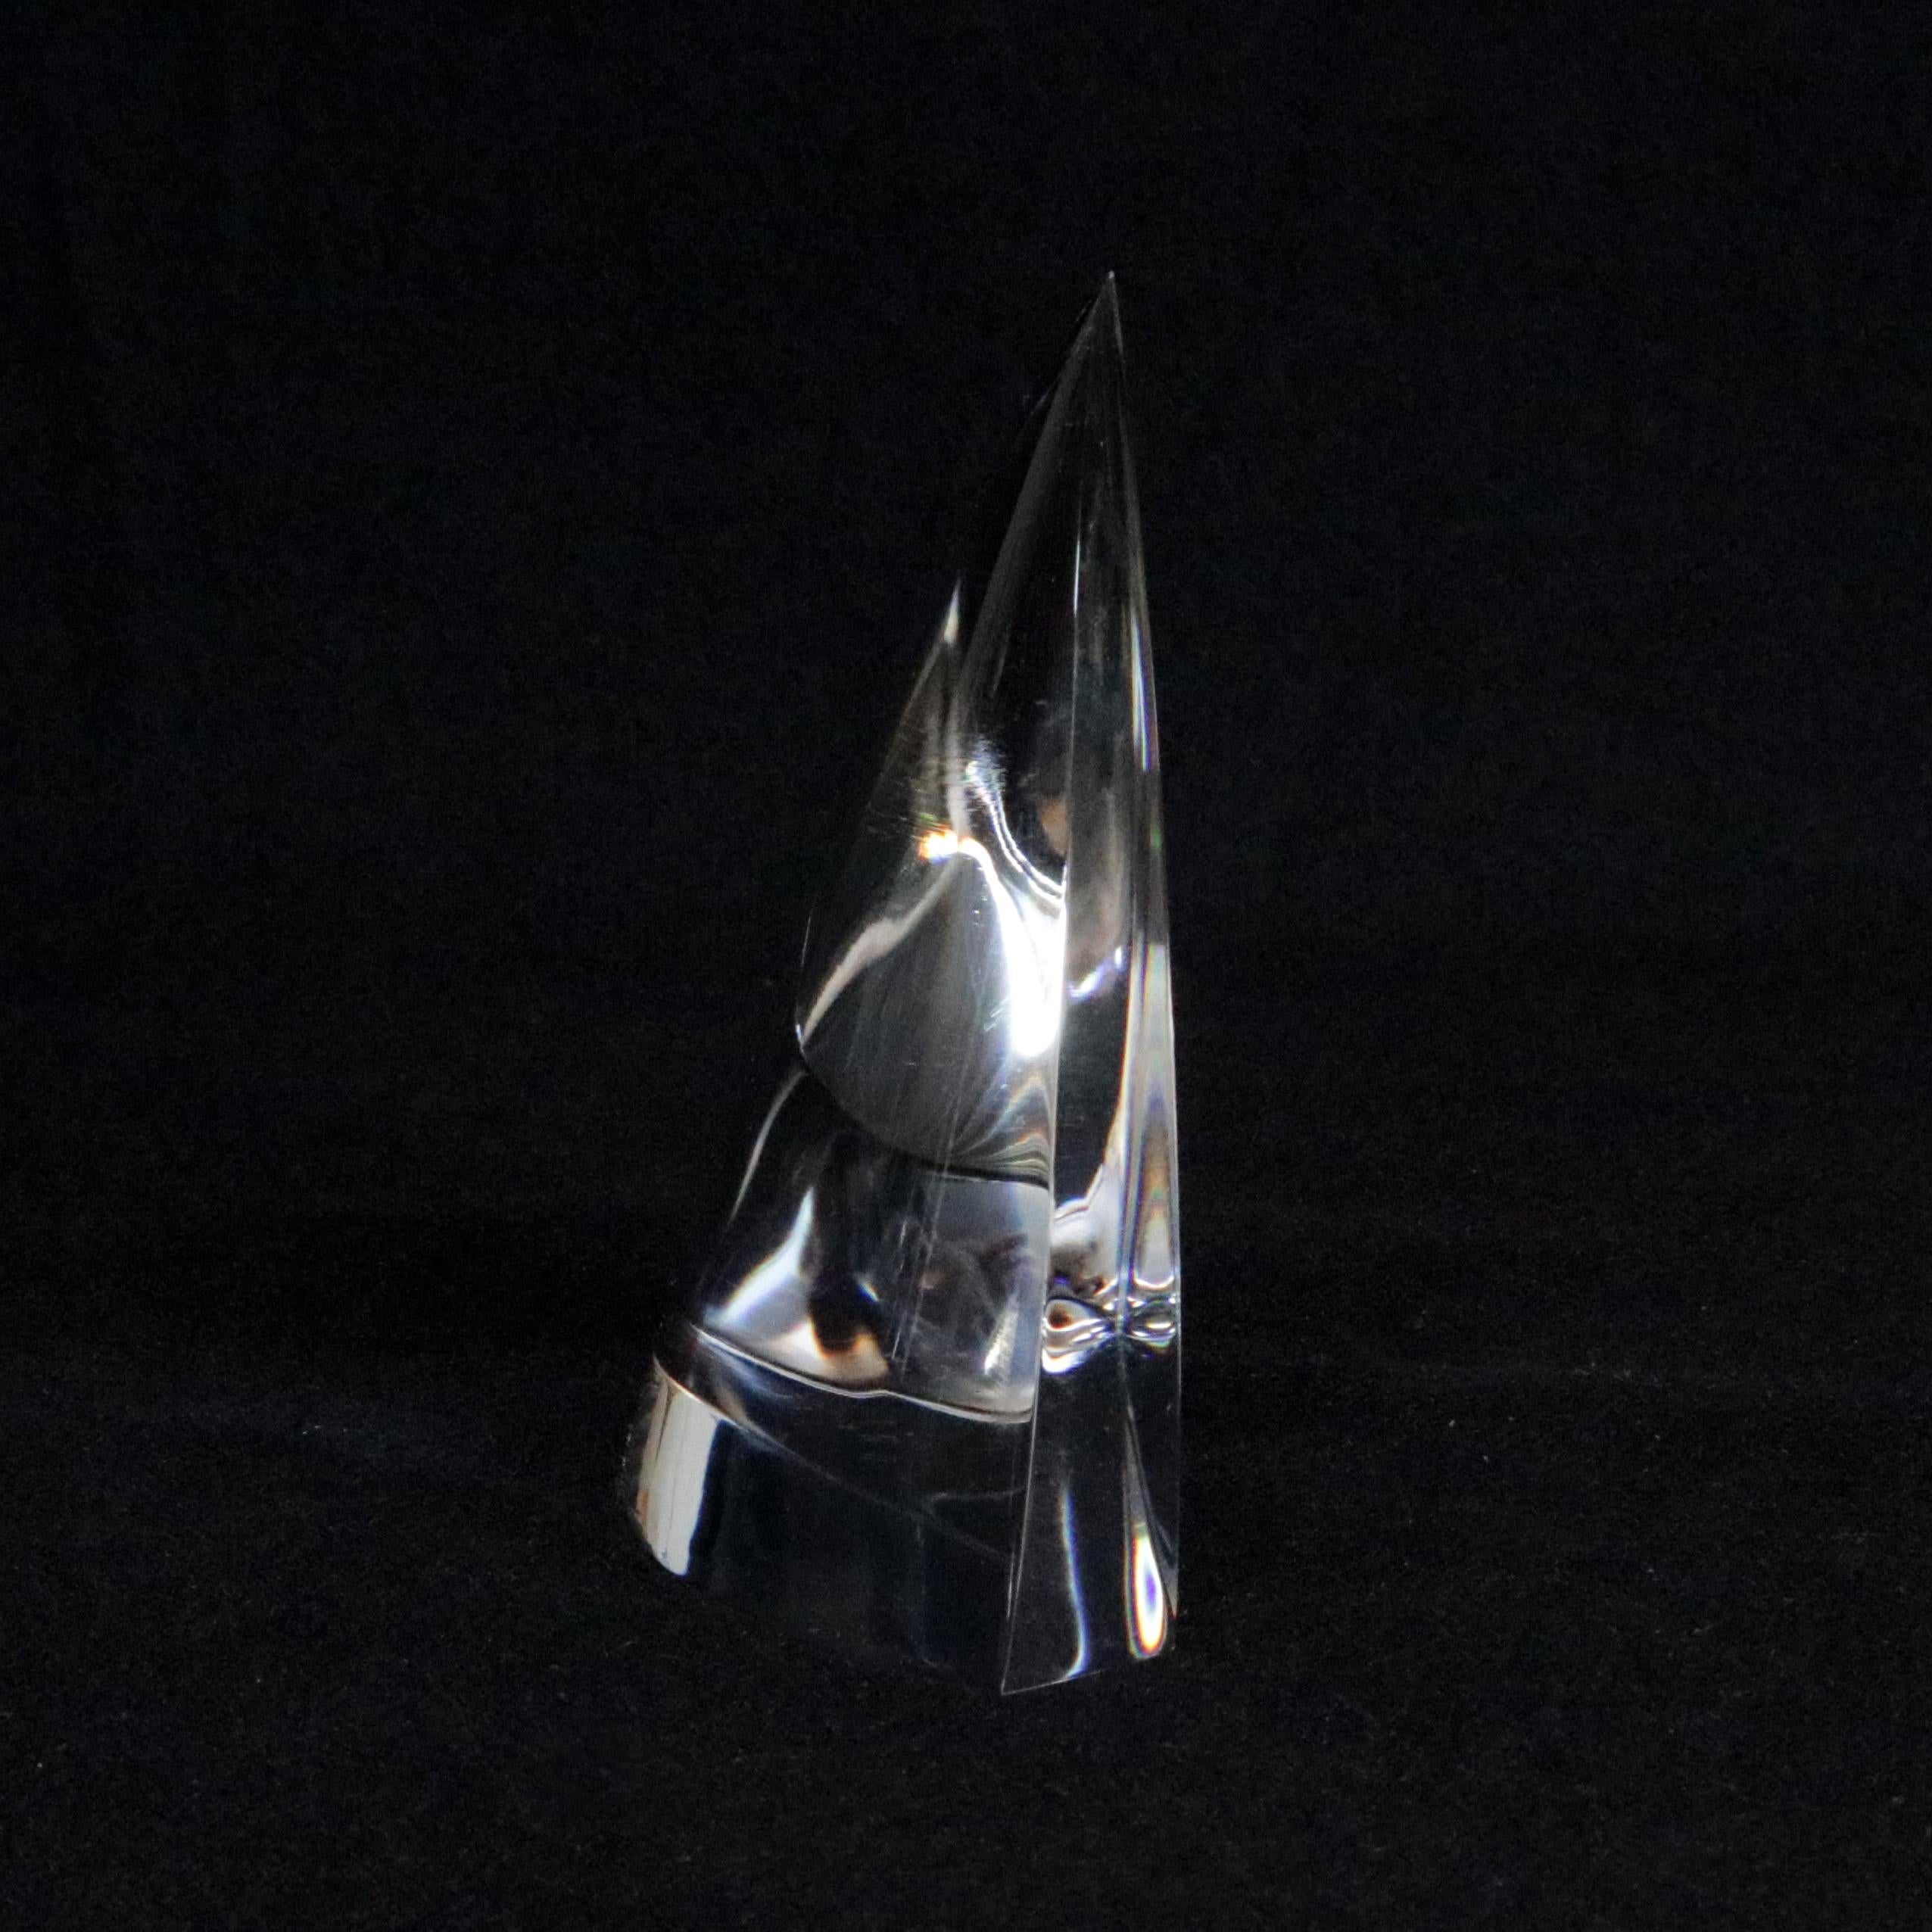 American Steuben Figurative Crystal Sculpture of Close To The Wind Sailboat Jib